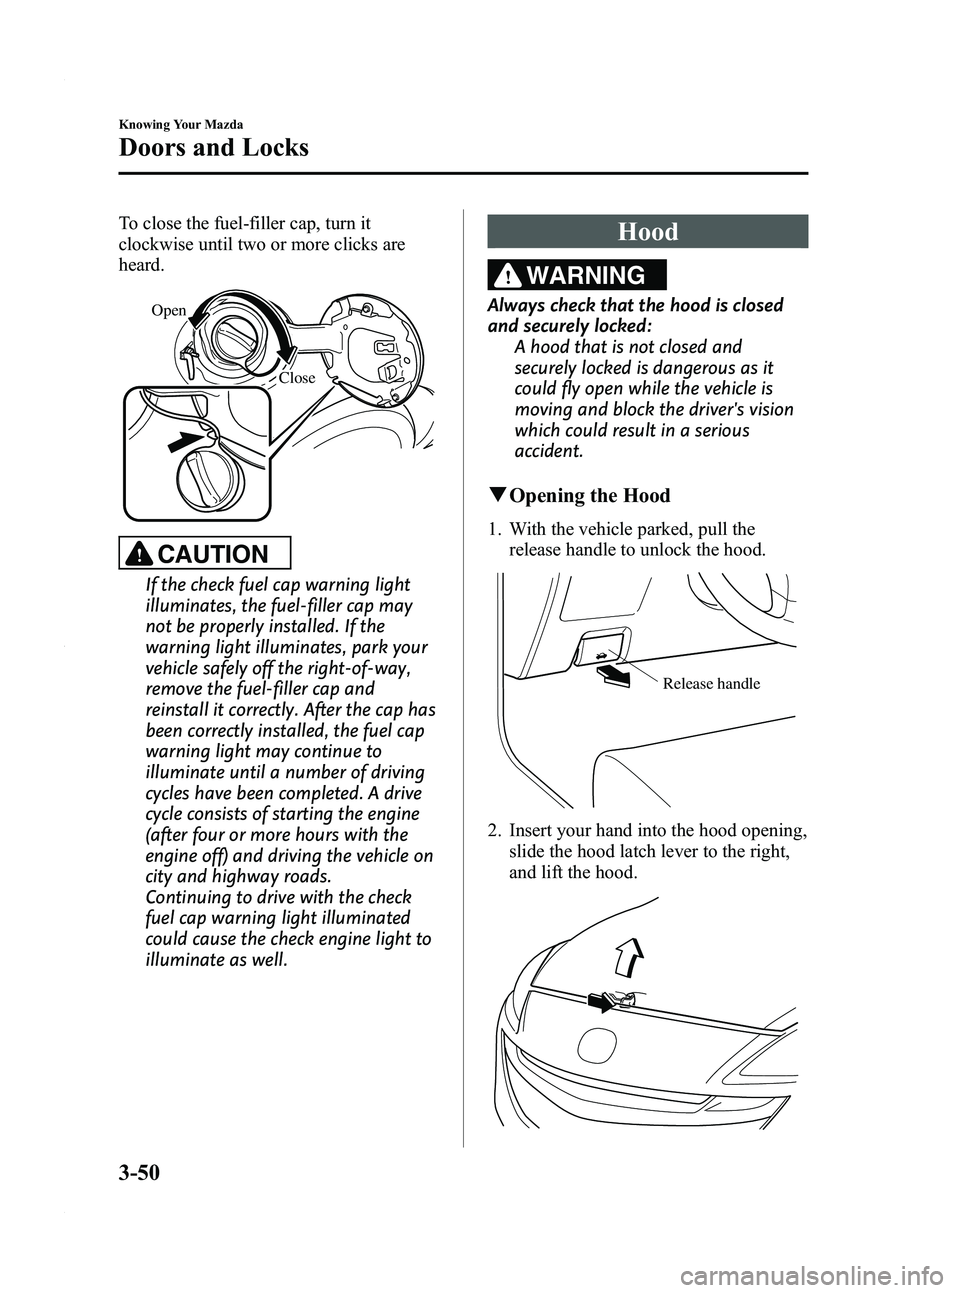 MAZDA MODEL 3 4-DOOR 2012  Owners Manual Black plate (128,1)
To close the fuel-filler cap, turn it
clockwise until two or more clicks are
heard.
Open
Close
CAUTION
If the check fuel cap warning light
illuminates, the fuel-filler cap may
not 